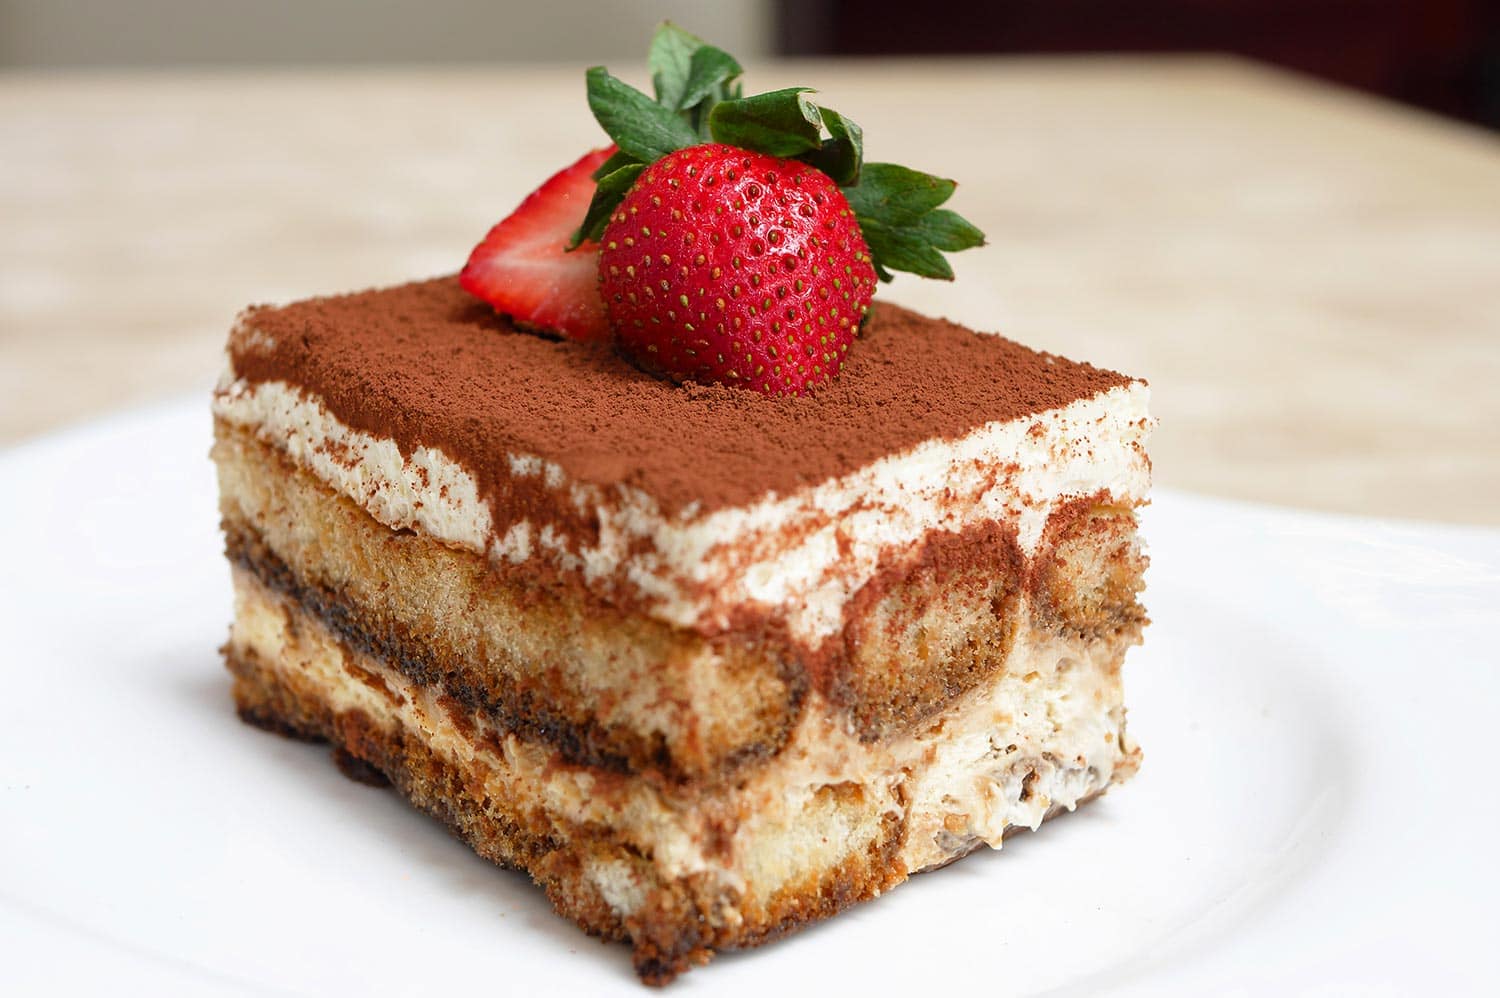 An Italian dessert consisting of layers of sponge cake soaked in coffee and brandy or liquor with powdered chocolate and mascarpone cheese